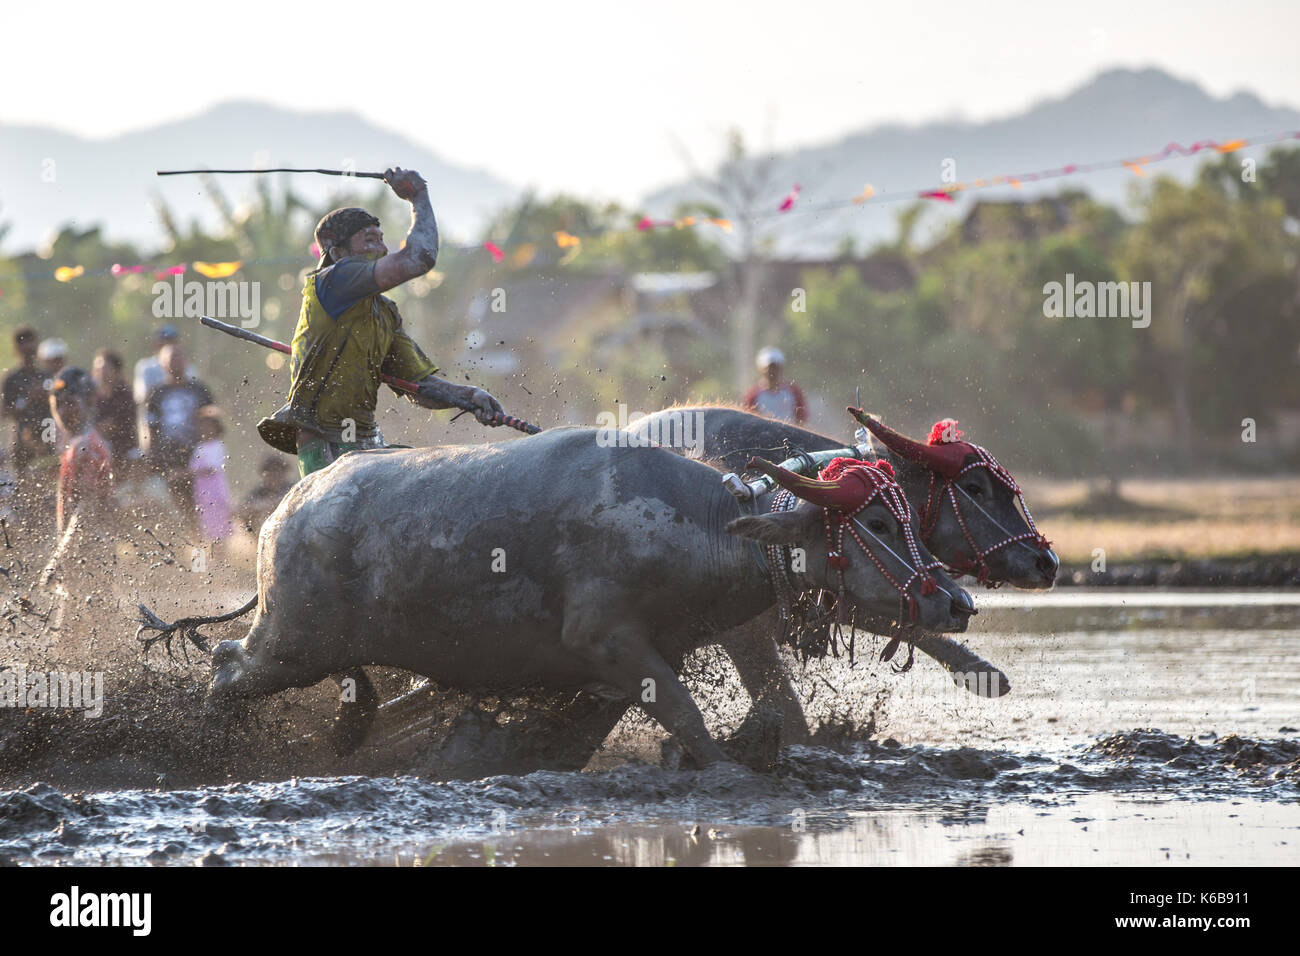 Jereweh, Sumbawa Barat, Indonesia - September 10, 2017: Local race competition held on Sumbawa in Jereweh, Indonesia on September 10, 2017 Photo - Alamy